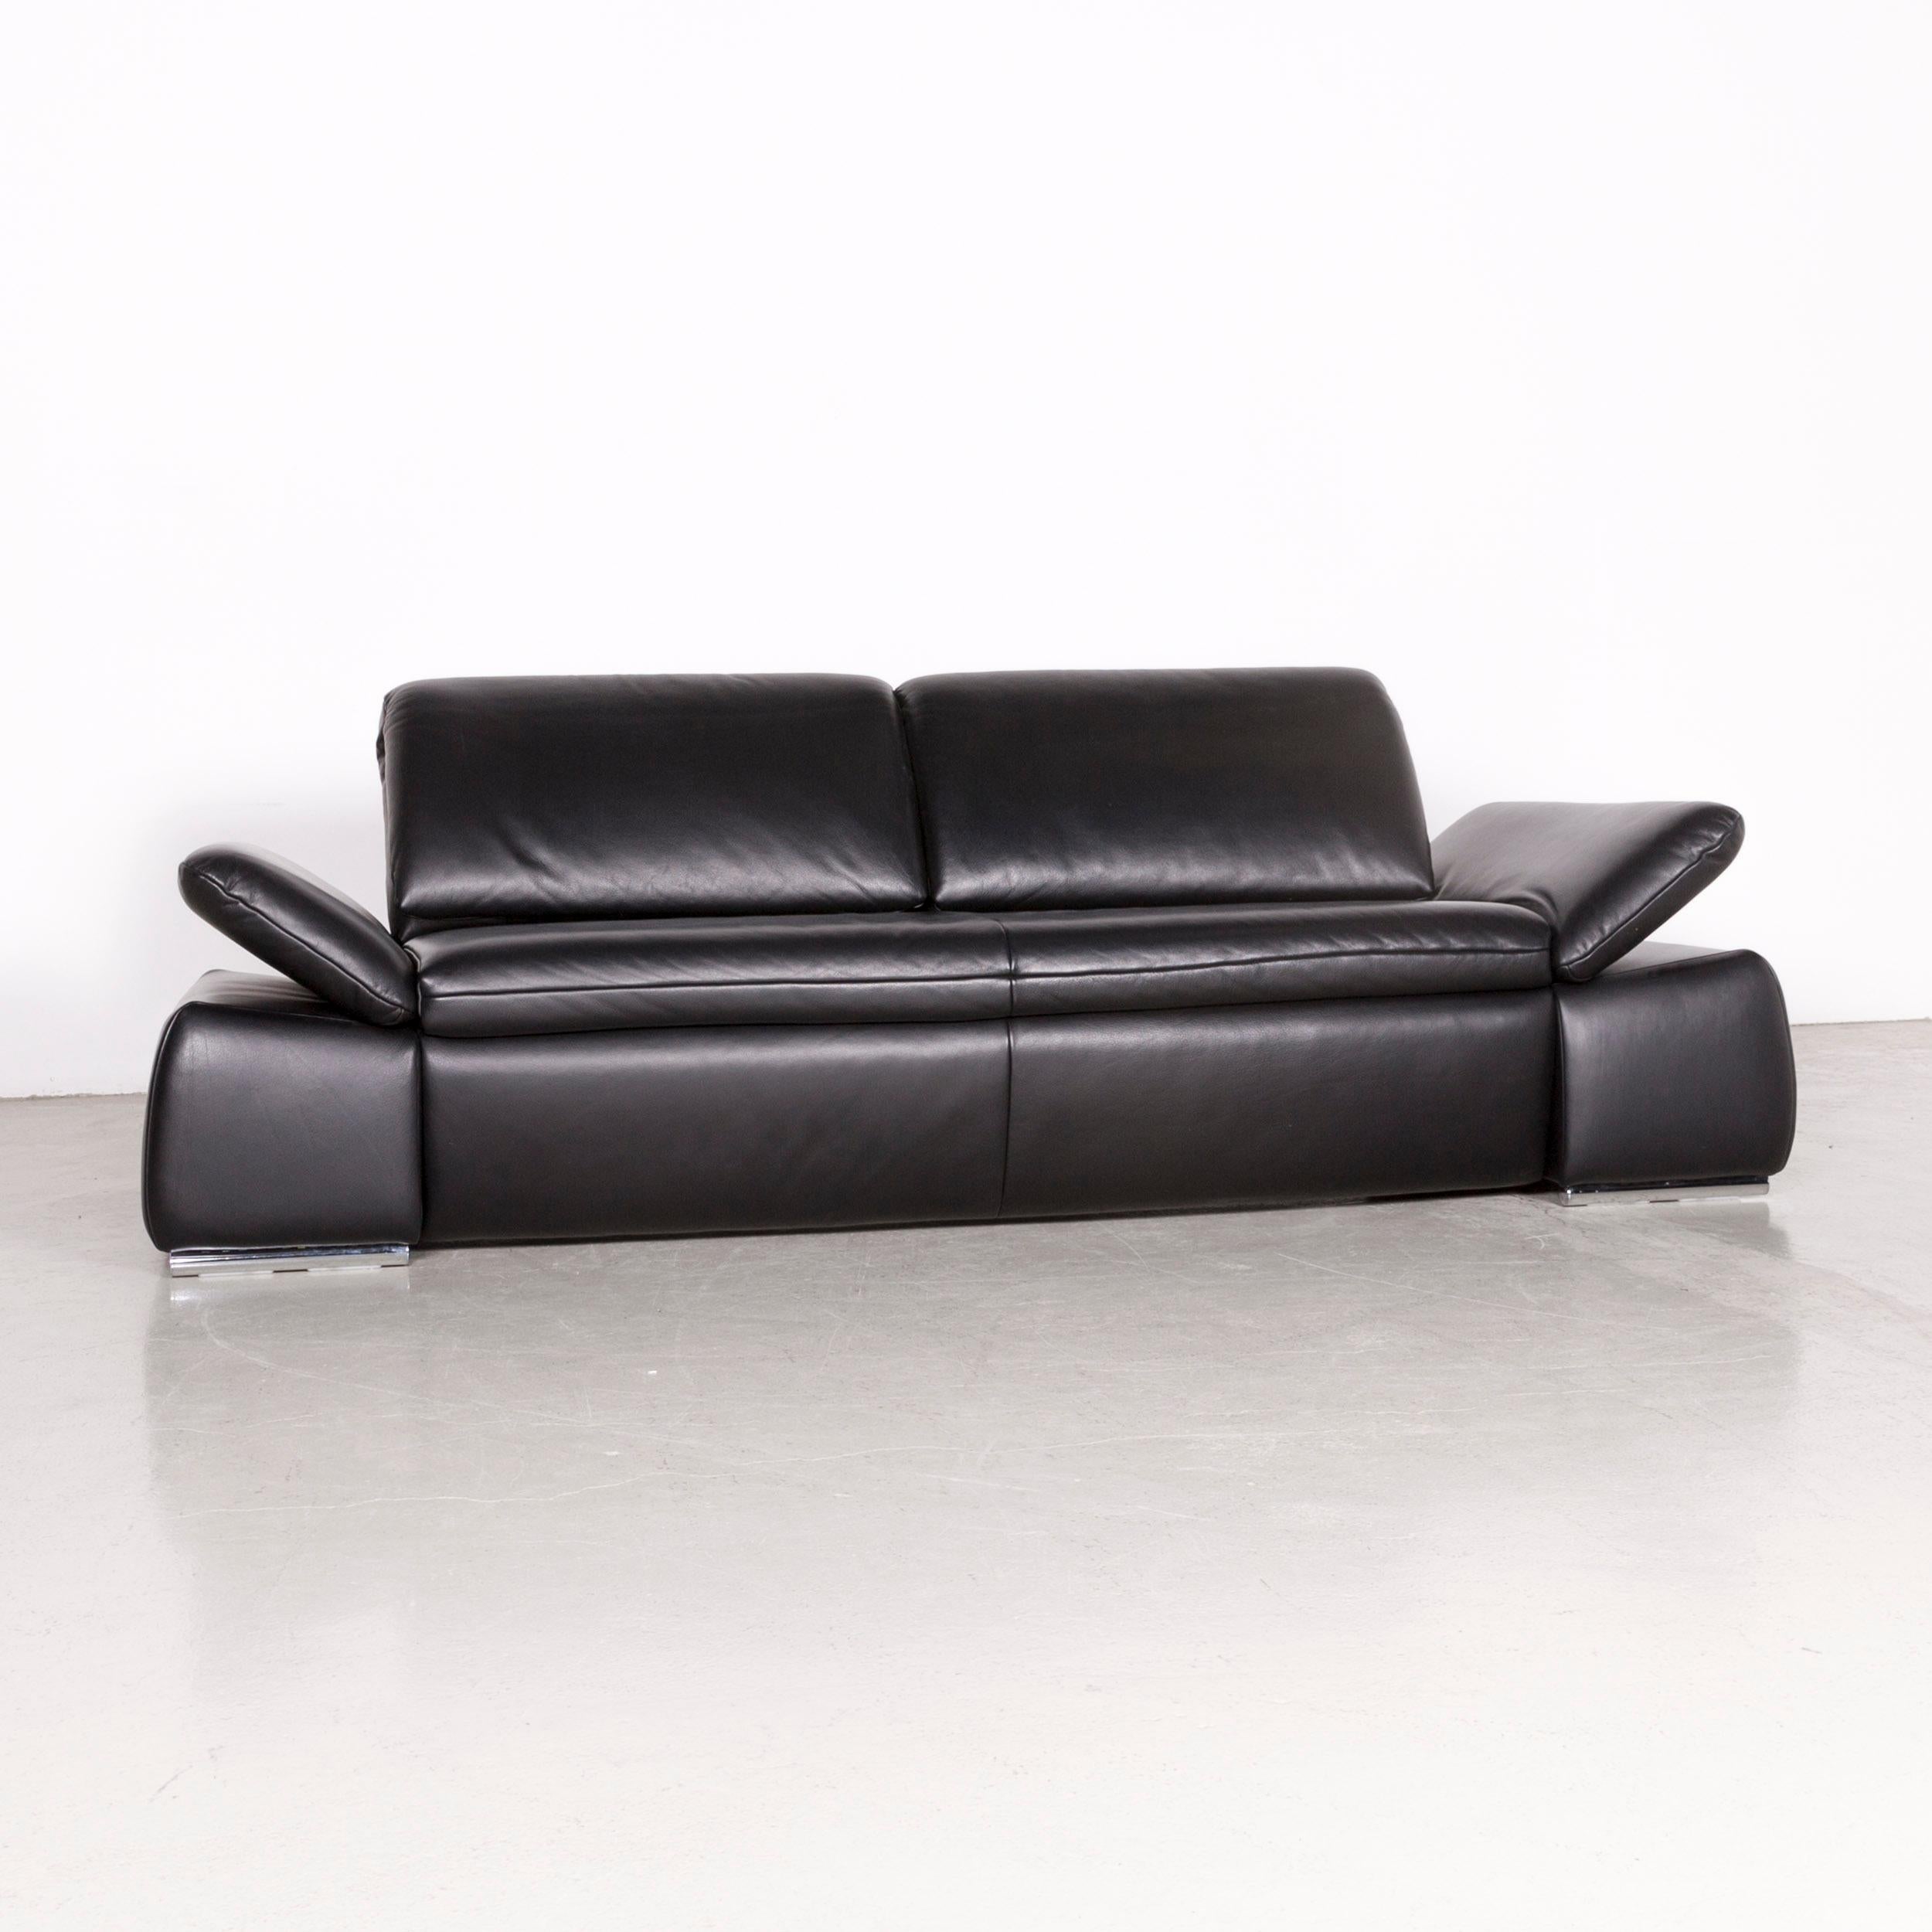 Koinor Evento Designer Sofa Black Three-Seat Leather Couch Electric Function For Sale 9